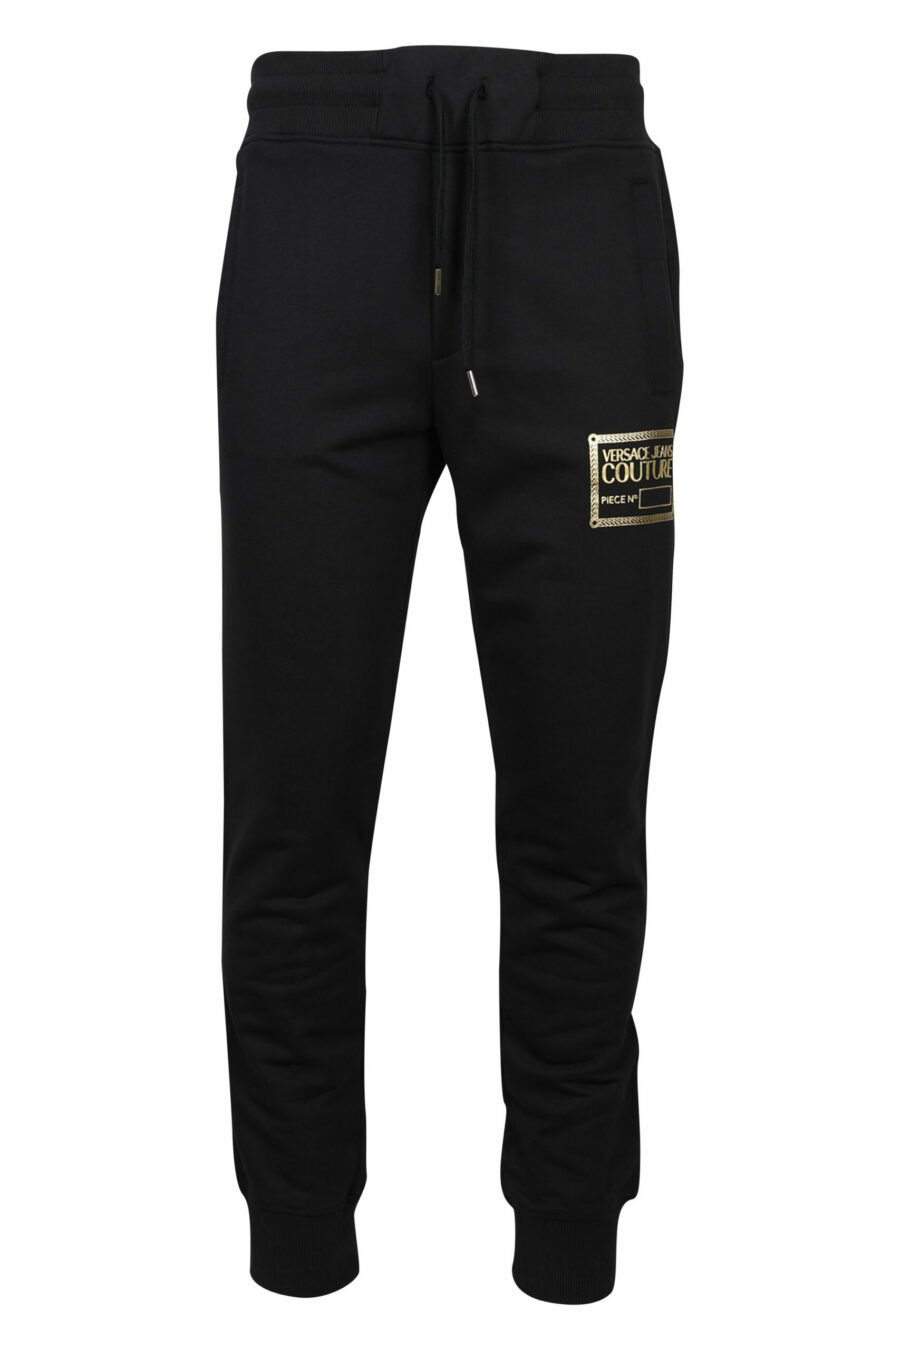 Tracksuit bottoms black with mini logo "piece number" - 8052019467178 scaled